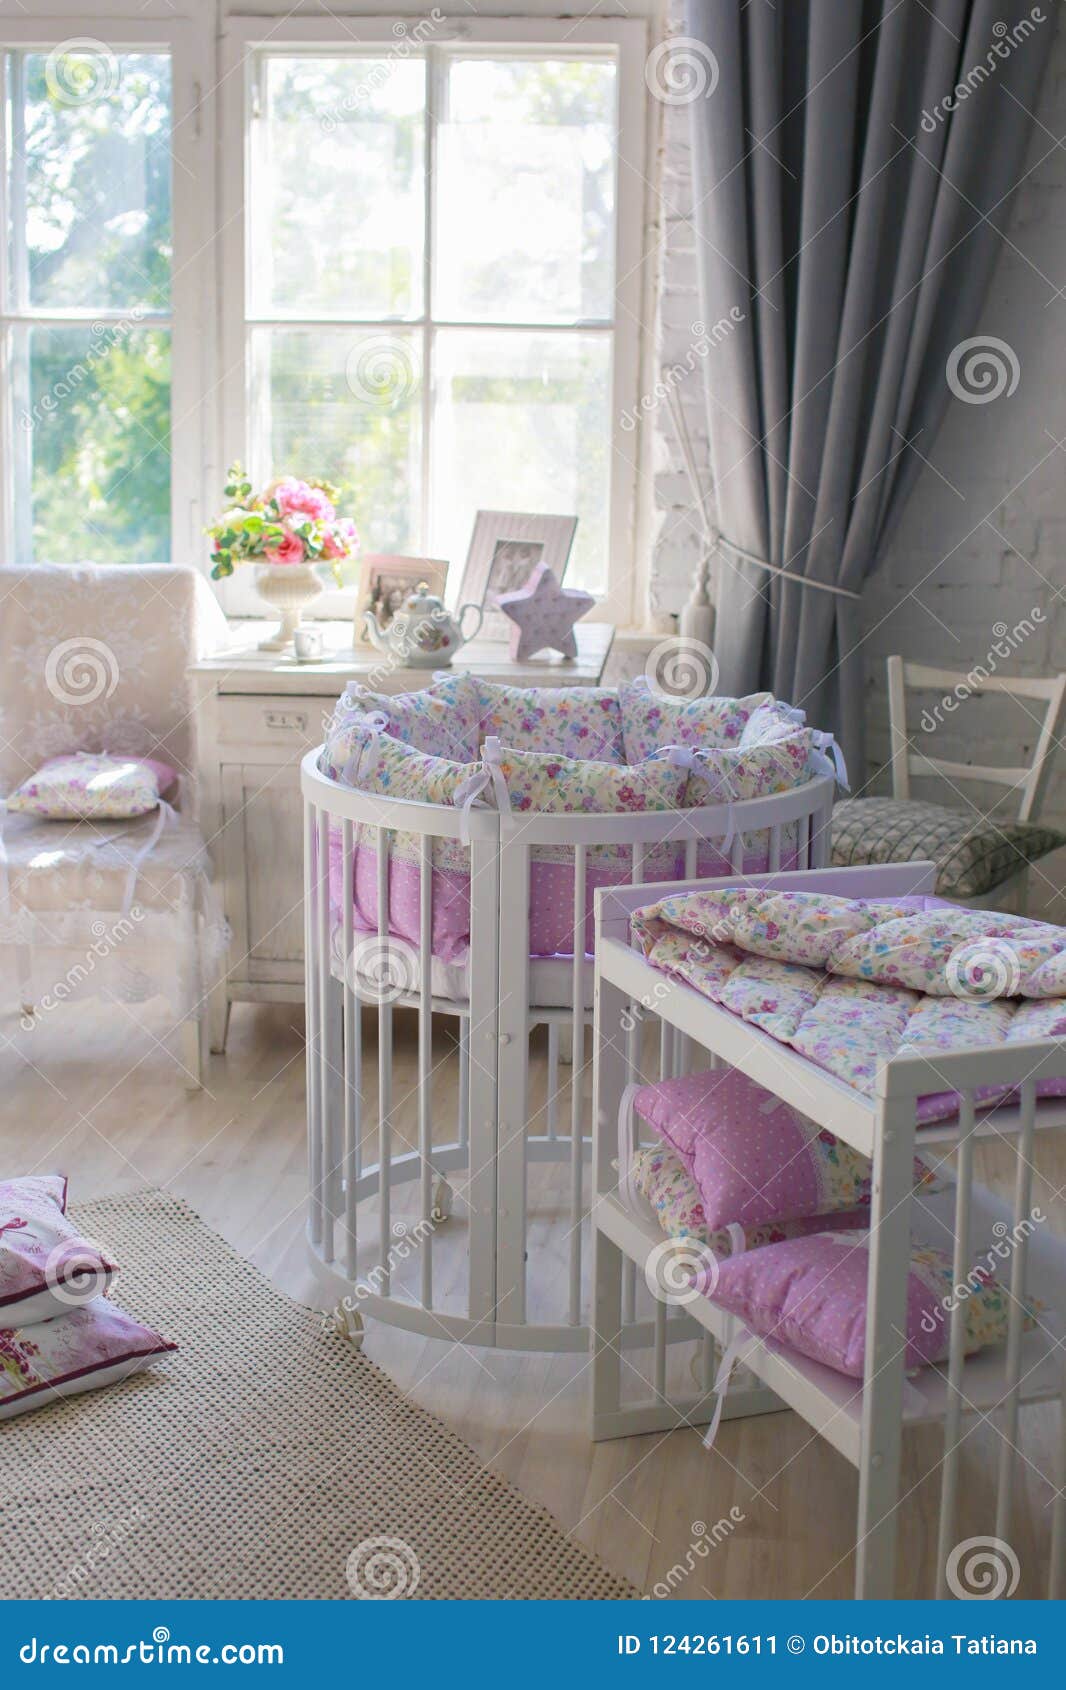 White Cribs For Babies Round Shape Stock Image Image Of Large